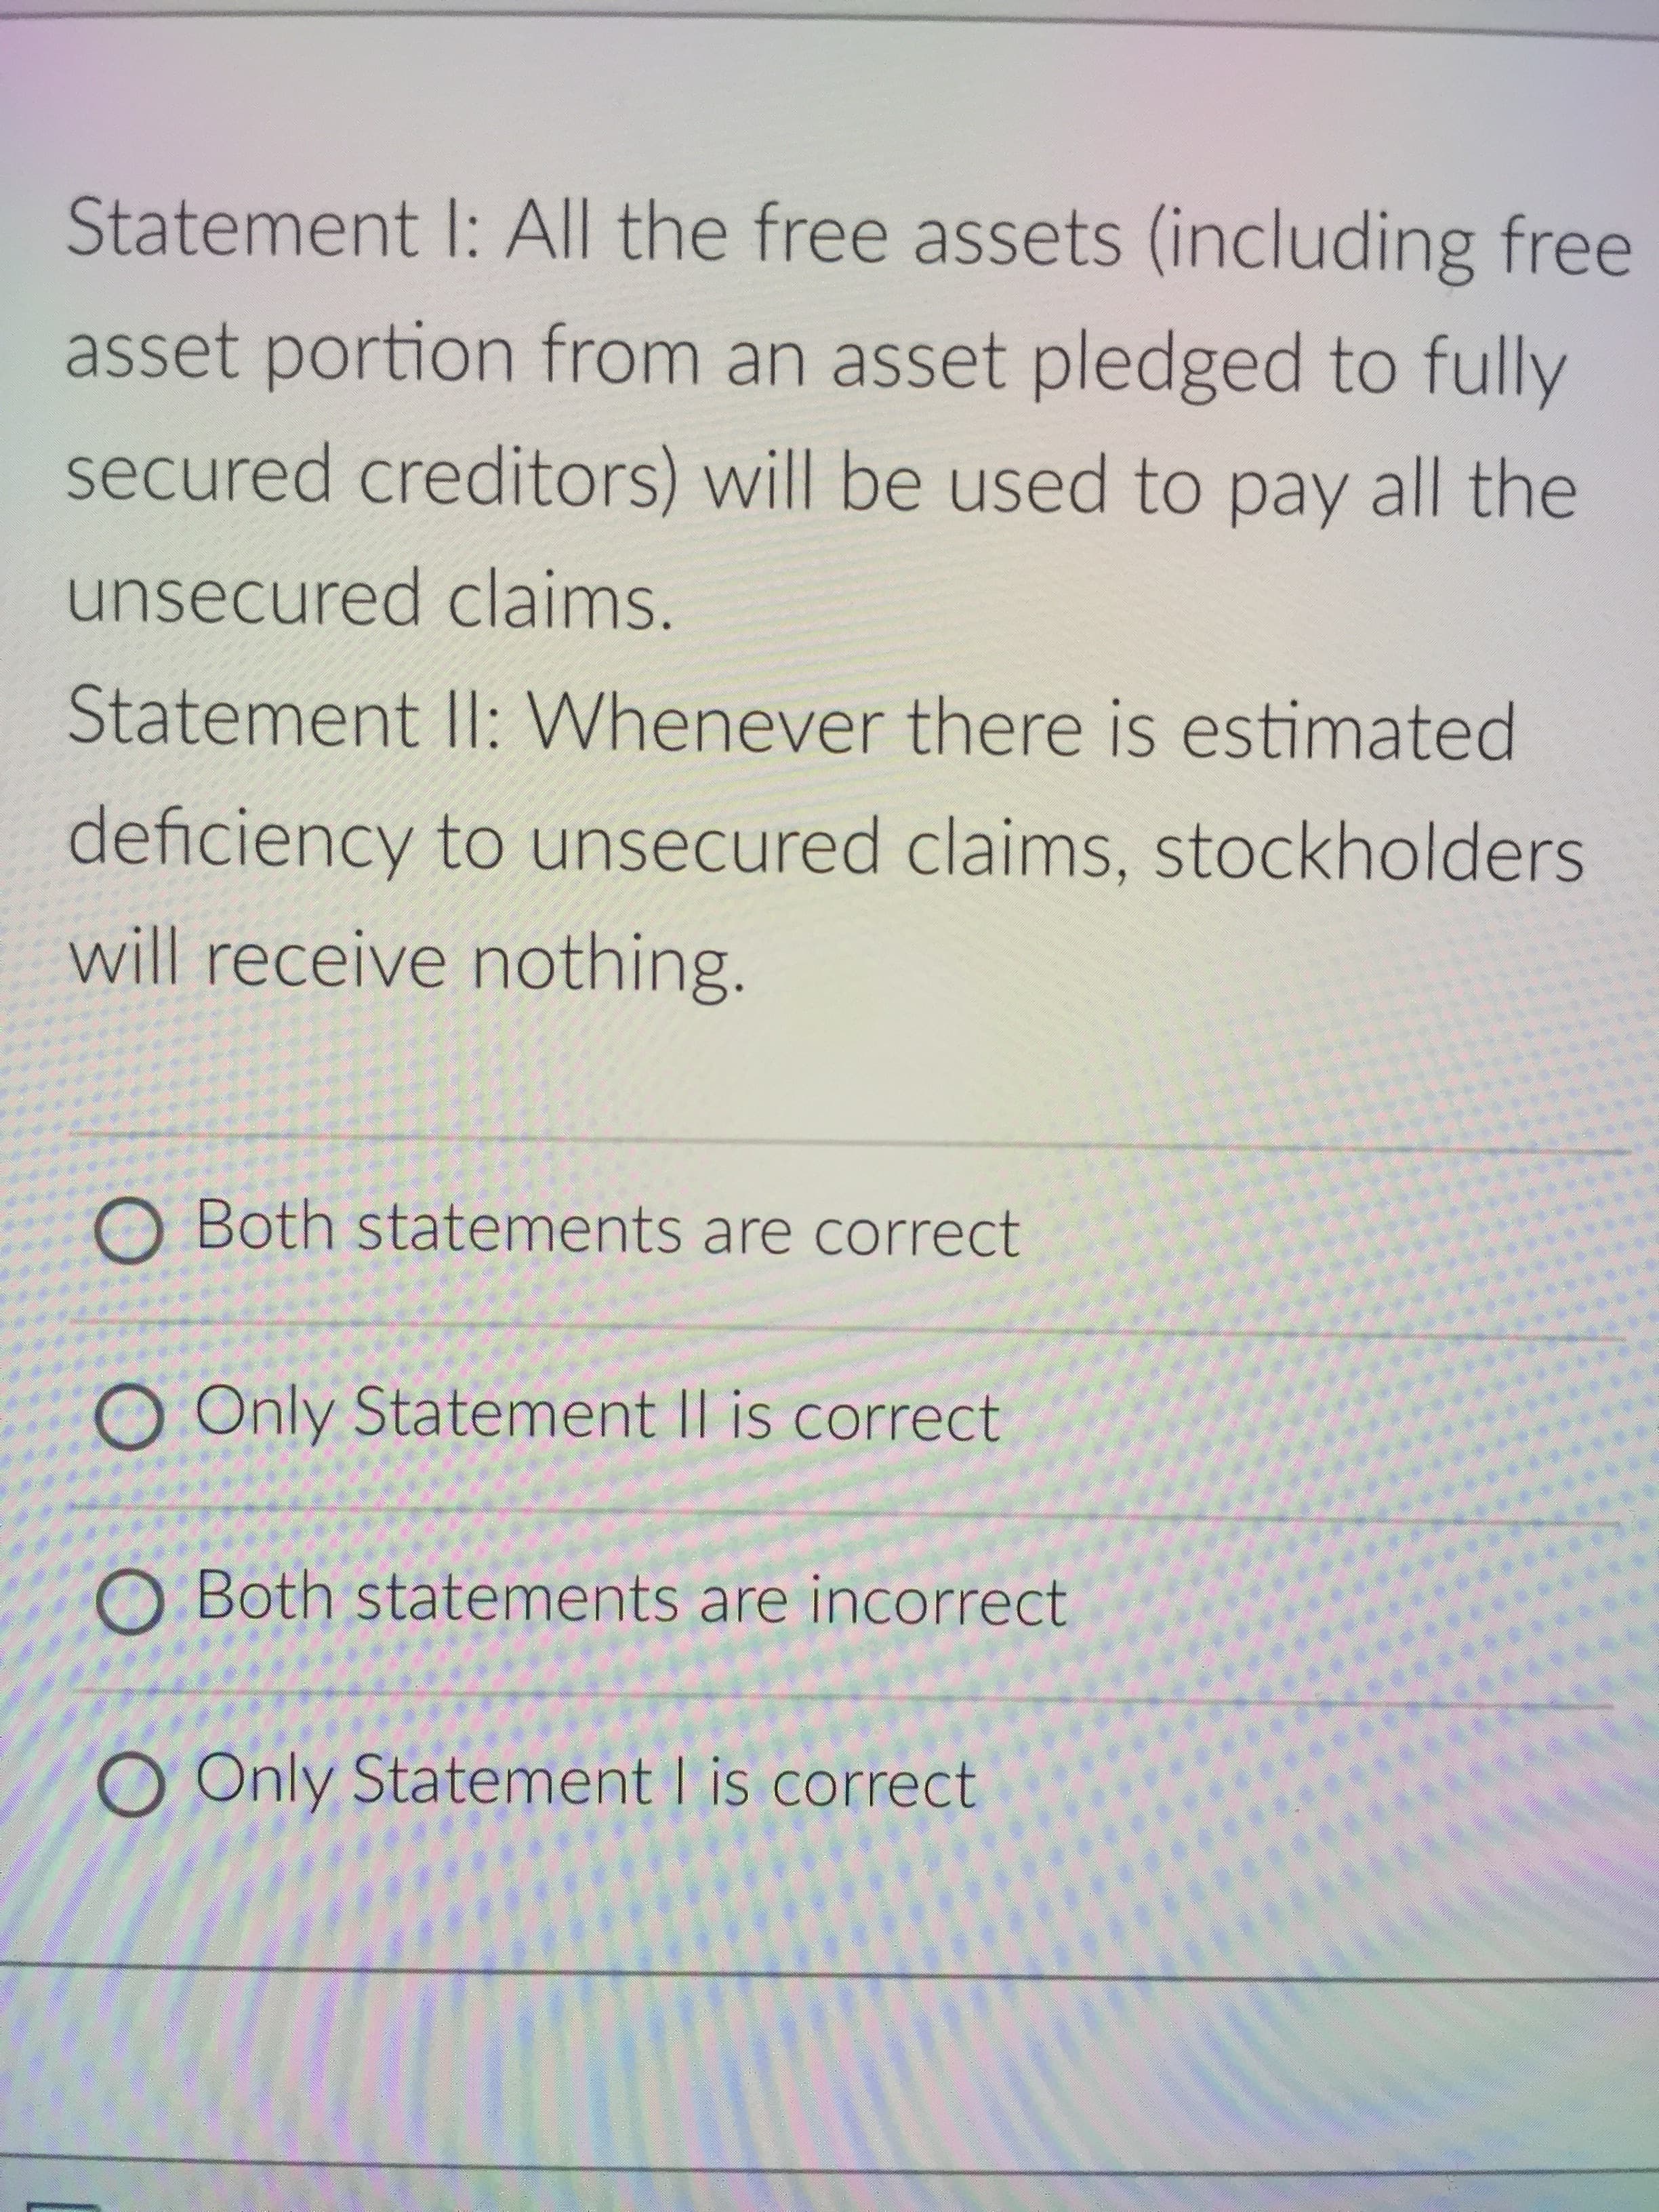 Statement I: All the free assets (including free
asset portion from an asset pledged to fully
secured creditors) will be used to pay all the
unsecured claims.
Statement II: Whenever there is estimated
deficiency to unsecured claims, stockholders
will receive nothing.
O Both statements are correct
O Only Statement II is correct
O Both statements are incorrect
O Only Statement I is correct
